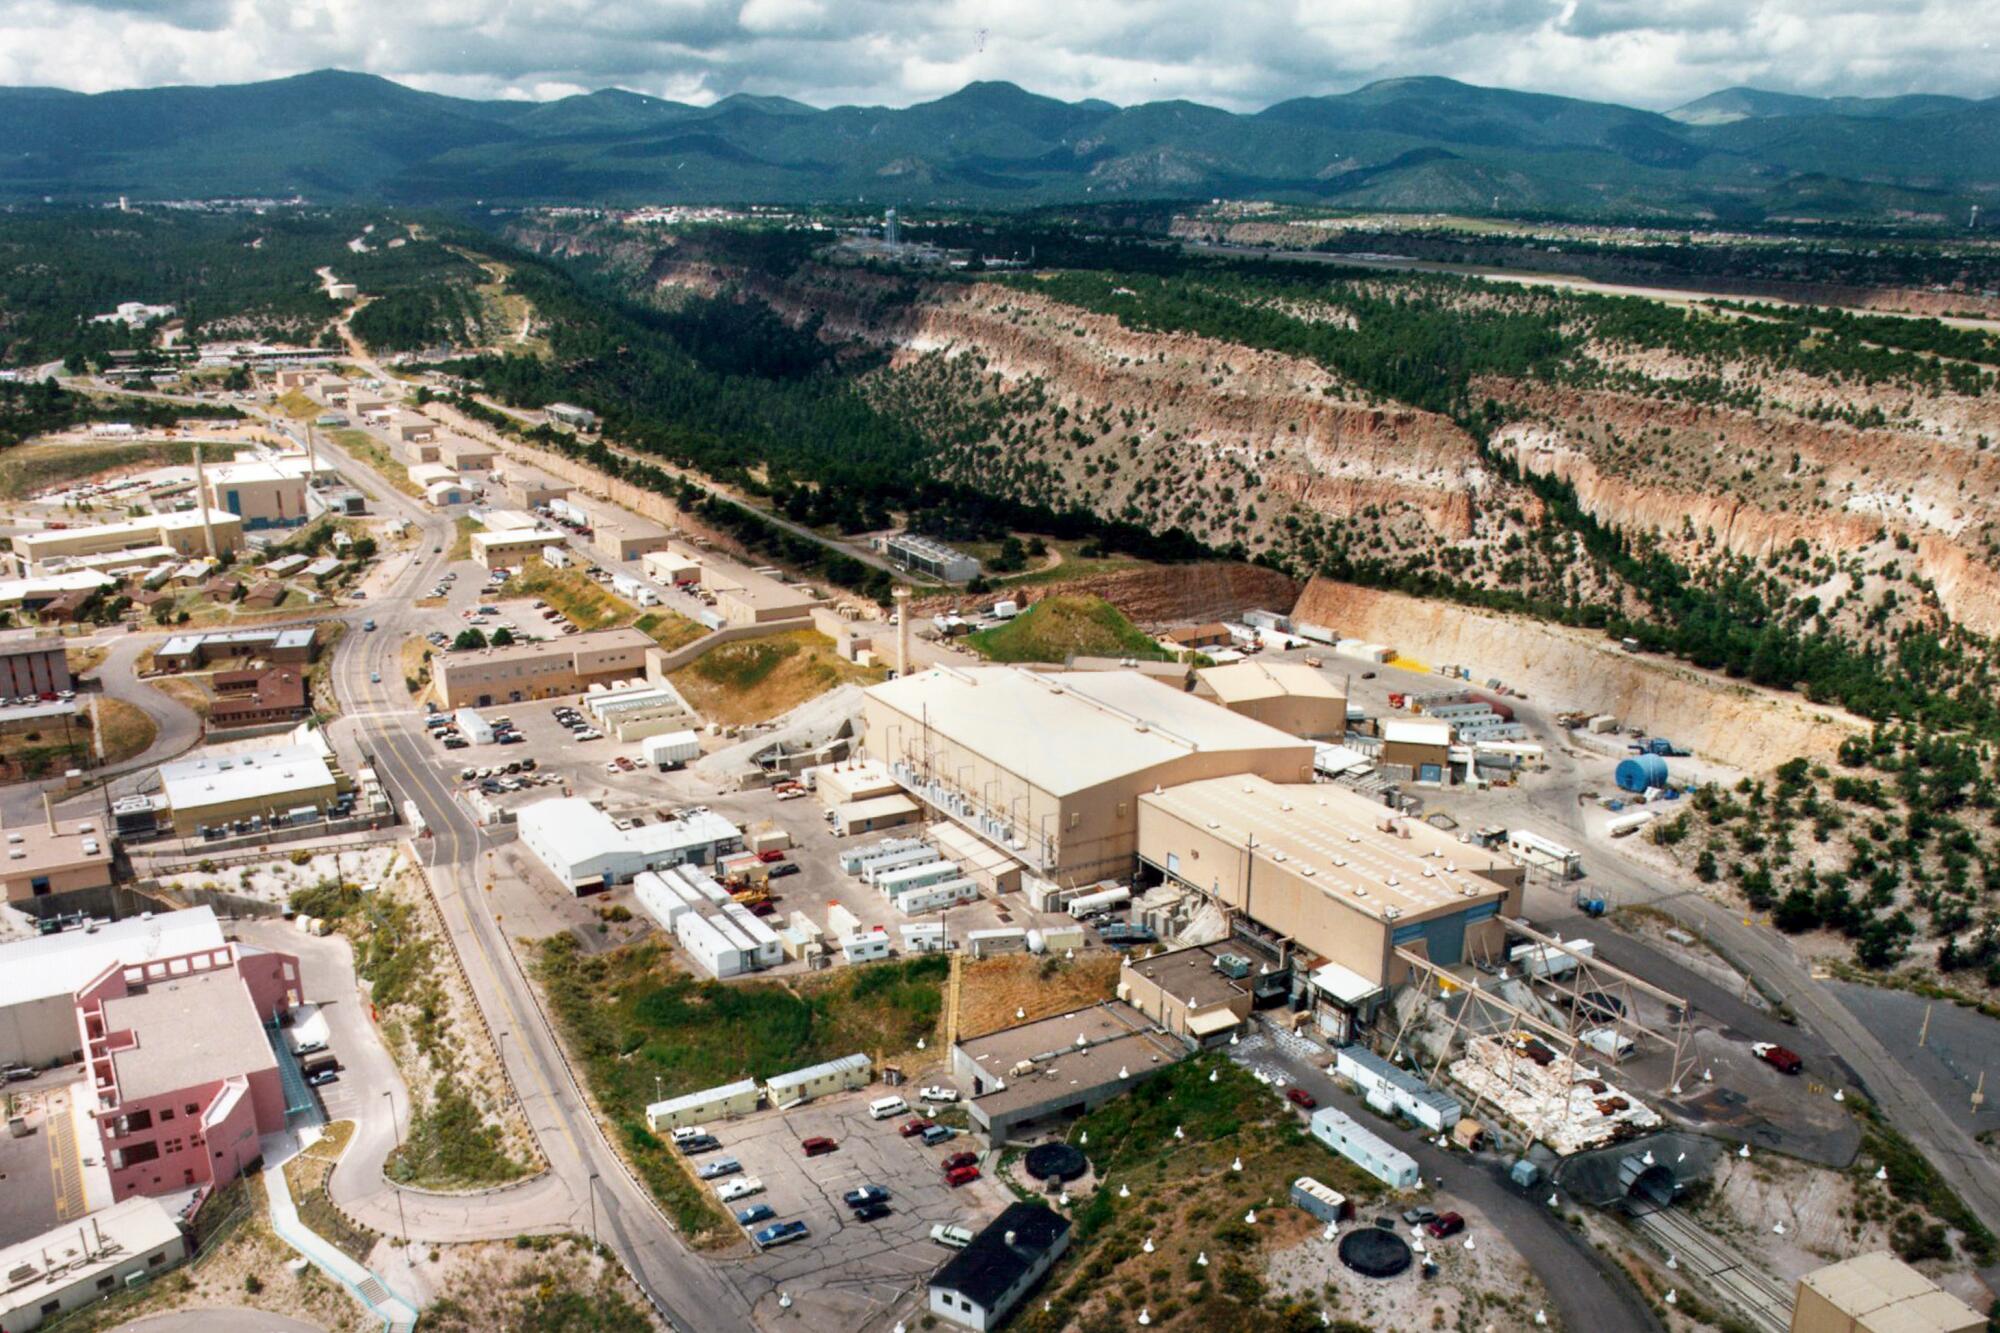 The Los Alamos National Laboratory in New Mexico with forested mountains on the horizon.